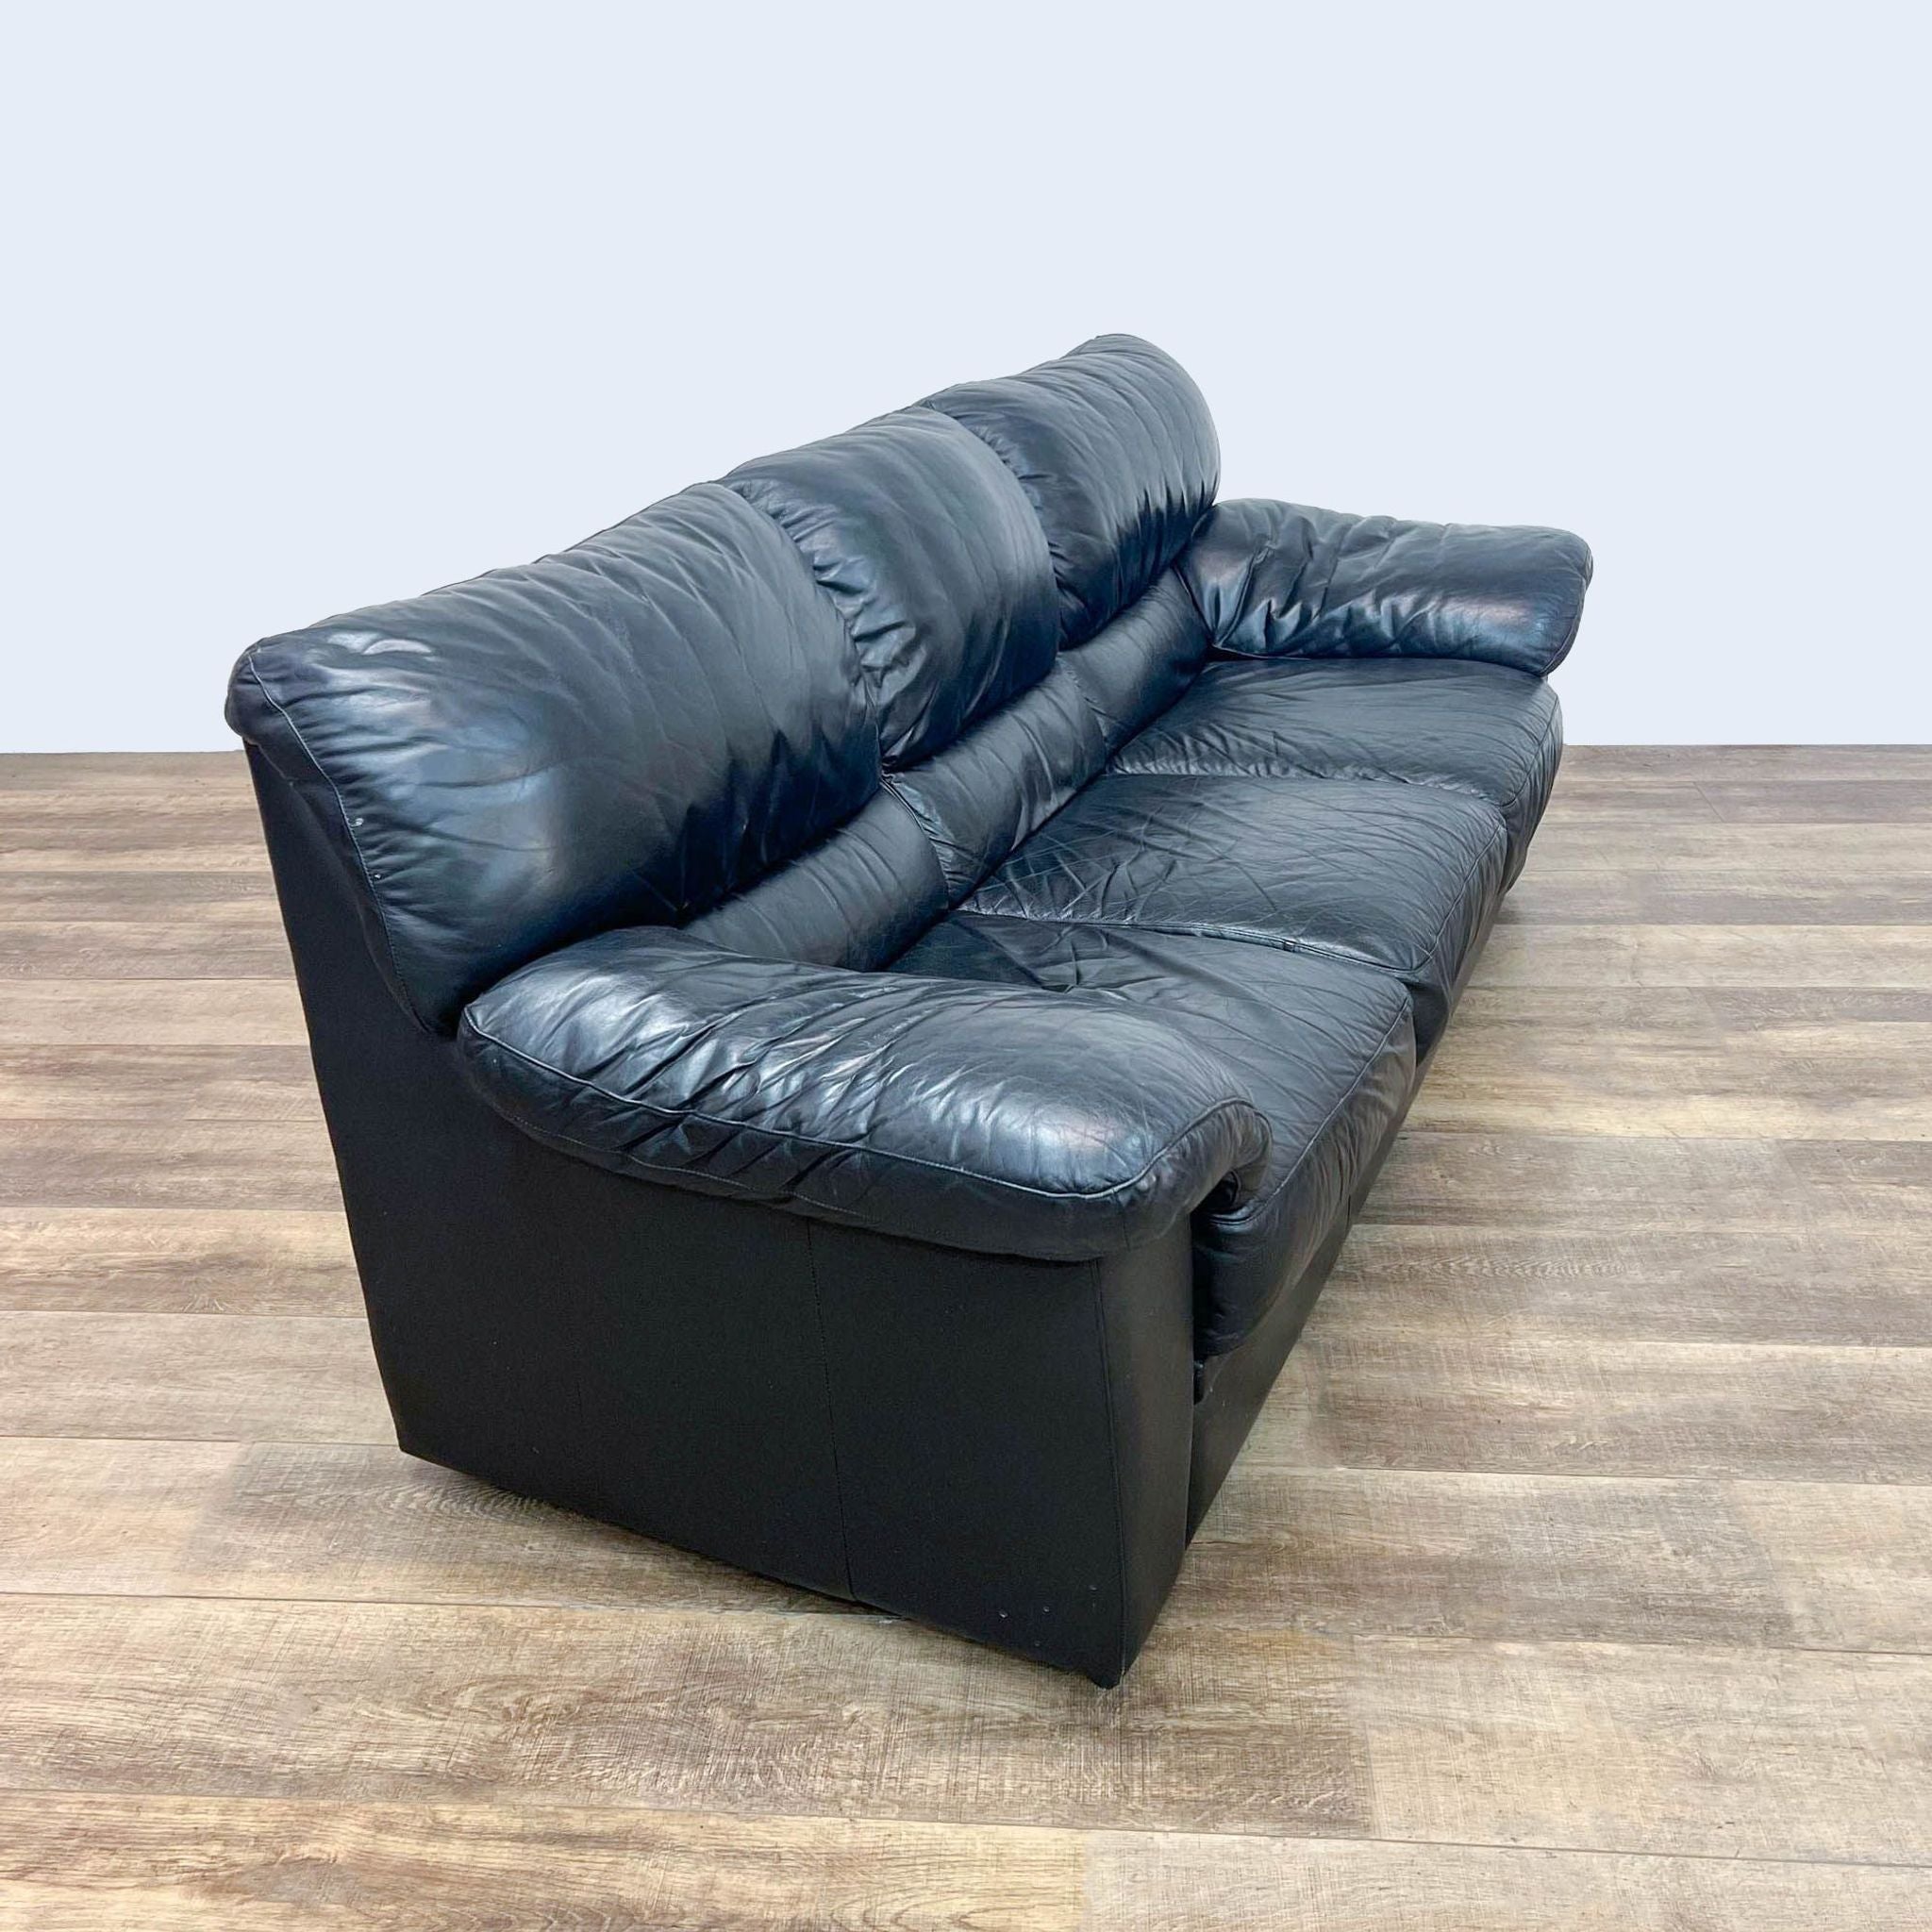 Reperch brand contemporary black leather three-seat sofa with pillow top arms on a wooden floor.